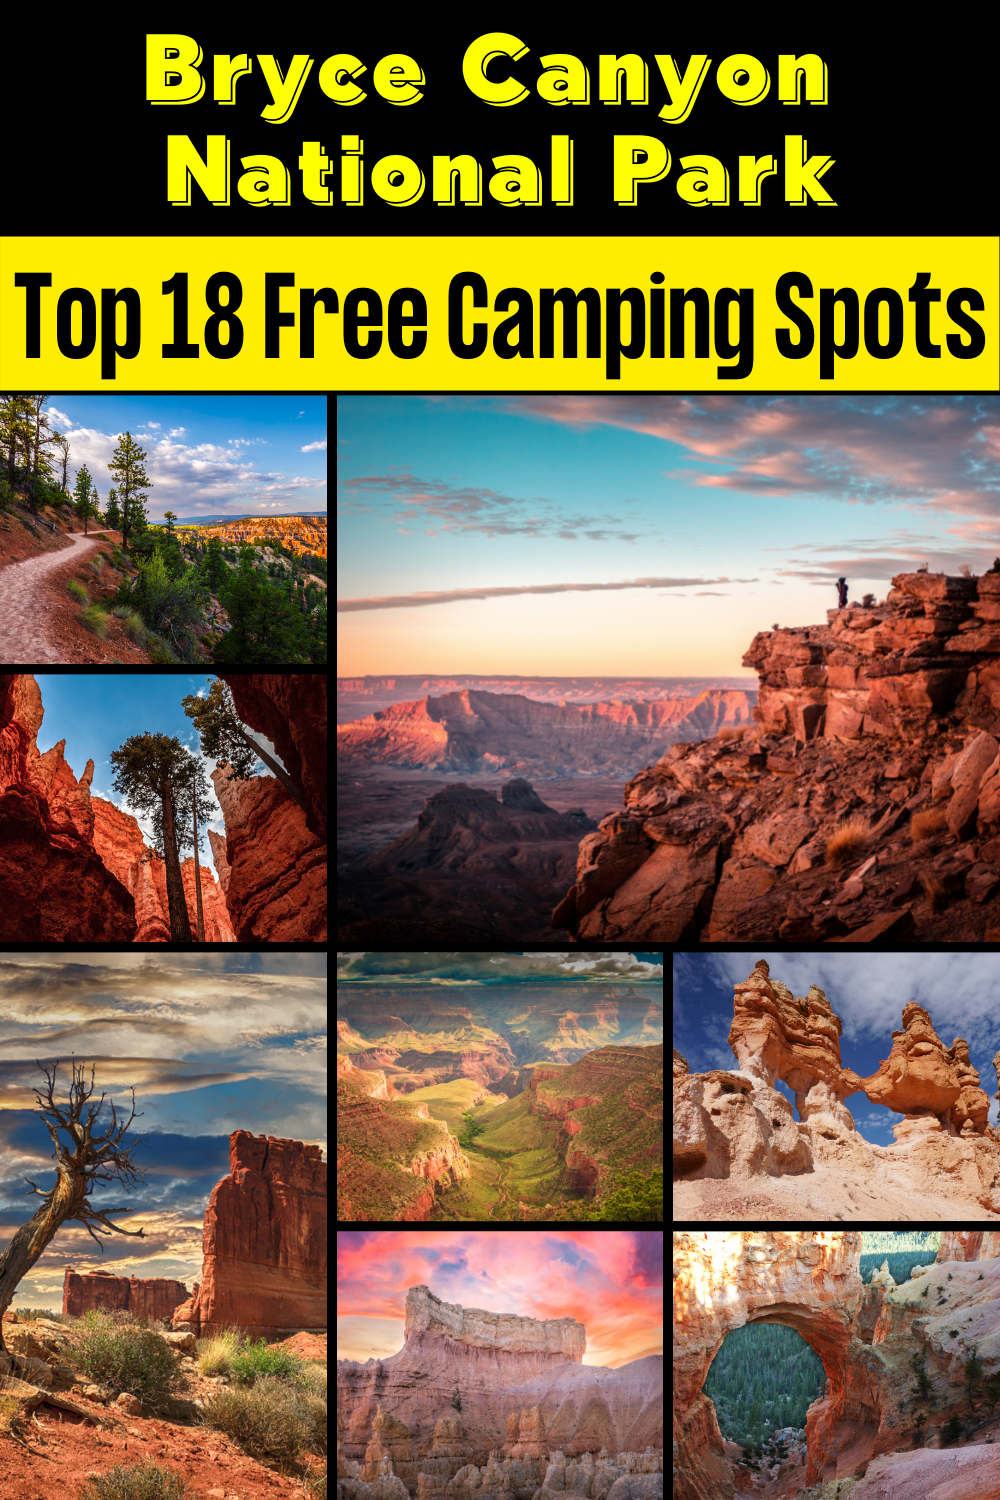  Top Bryce Canyon National Park Free Campsites 